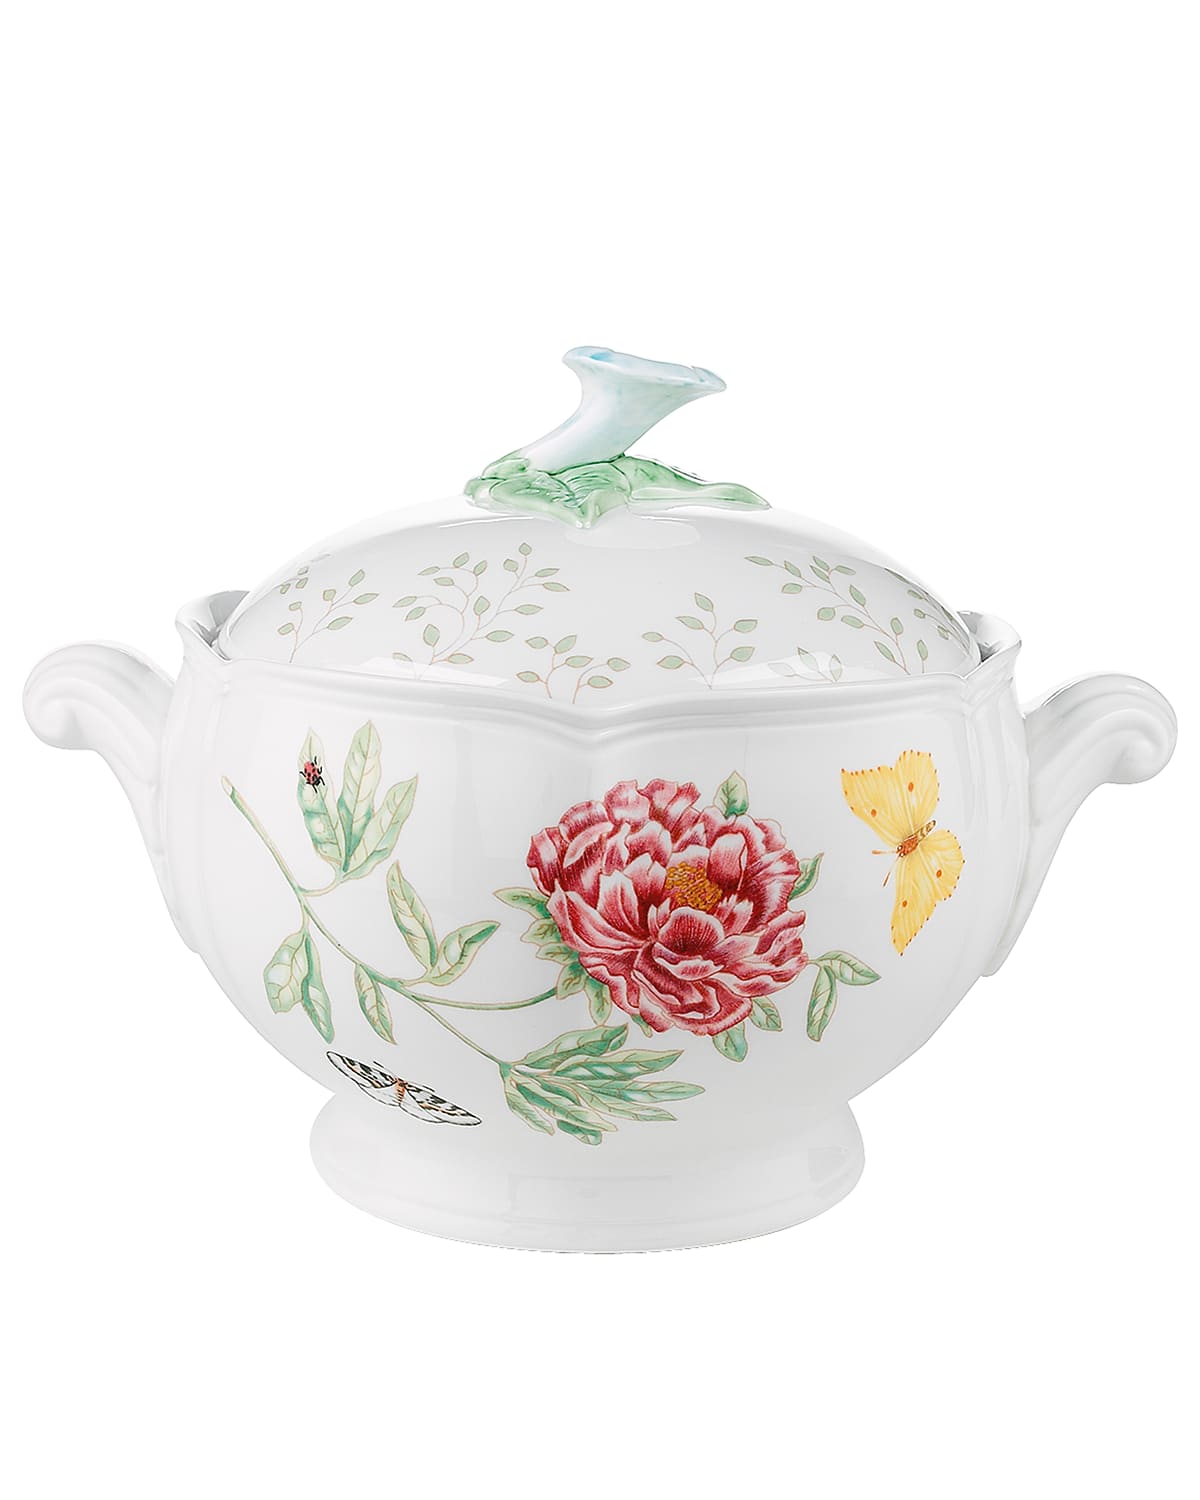 Lenox Butterfly Meadow Covered Casserole Dish